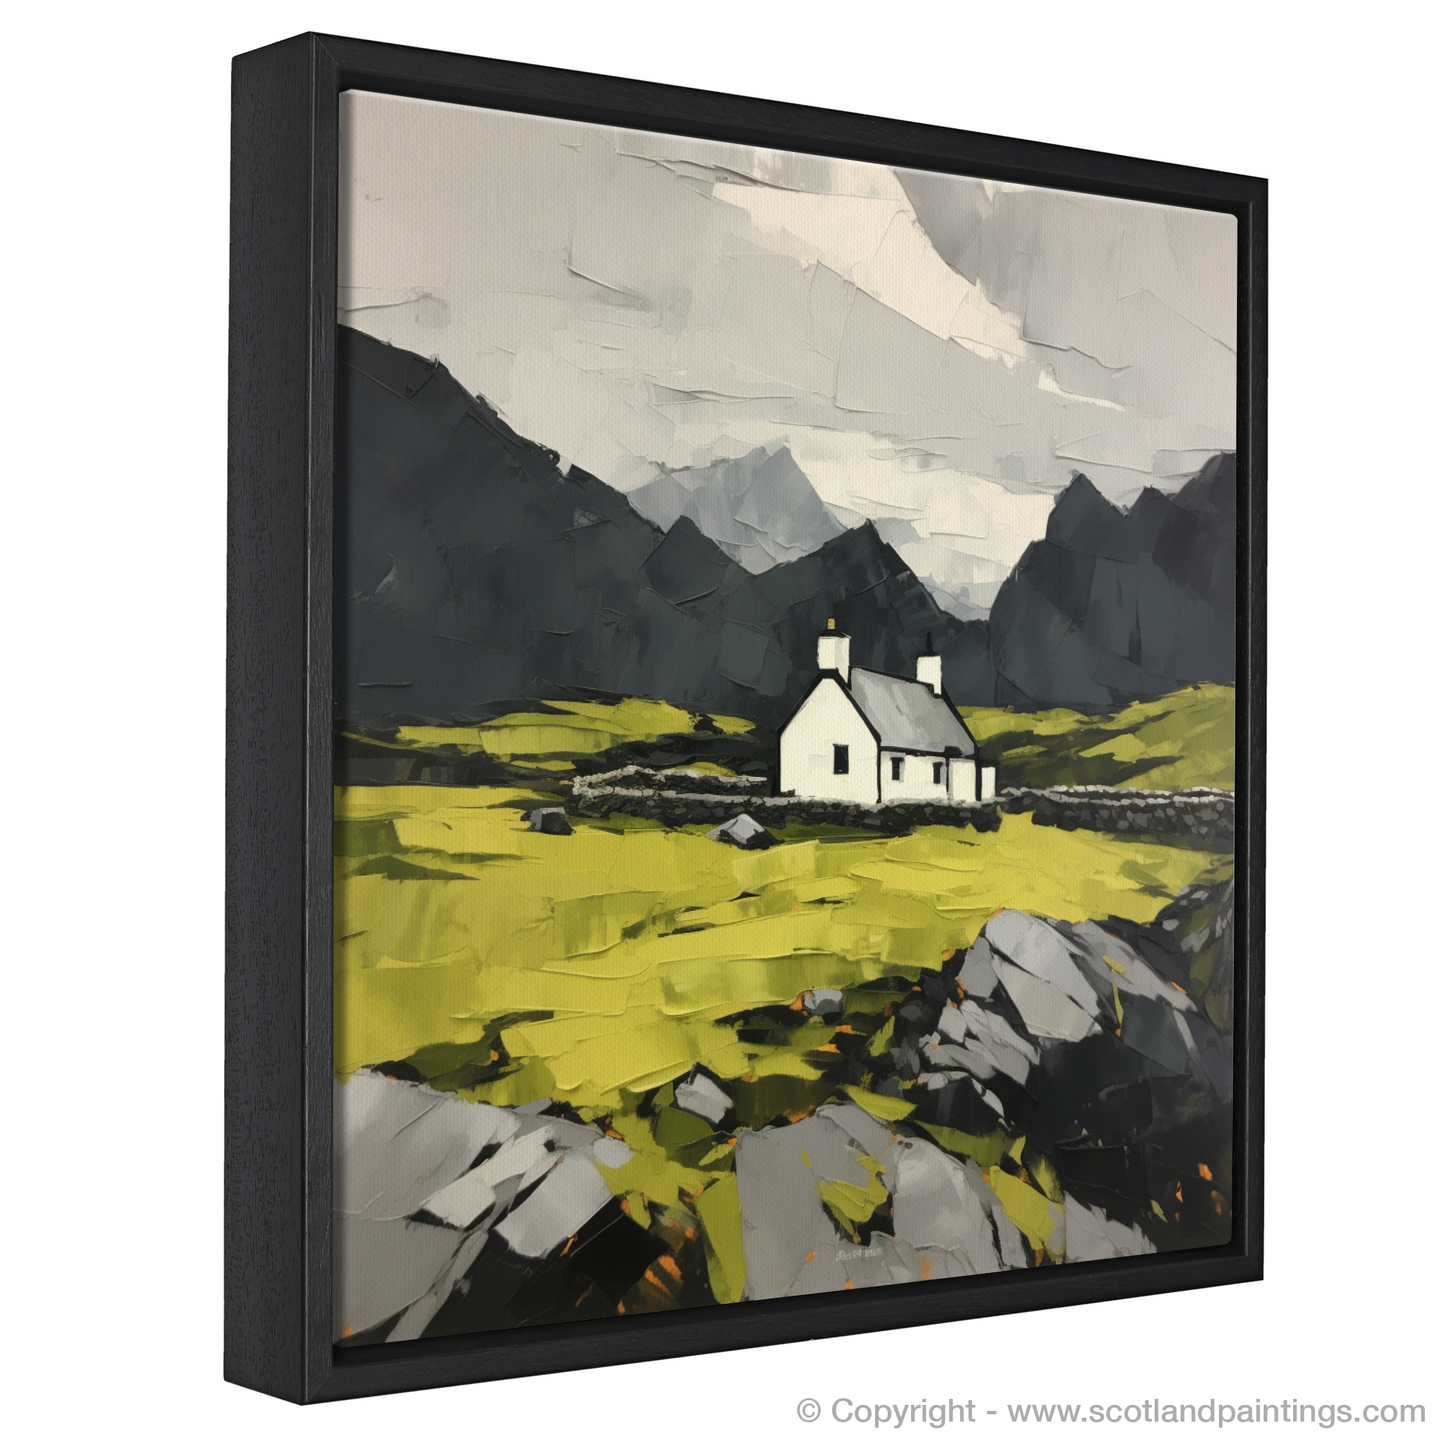 Painting and Art Print of Ben Vane. Majestic Wilderness: An Expressionist Ode to Ben Vane.